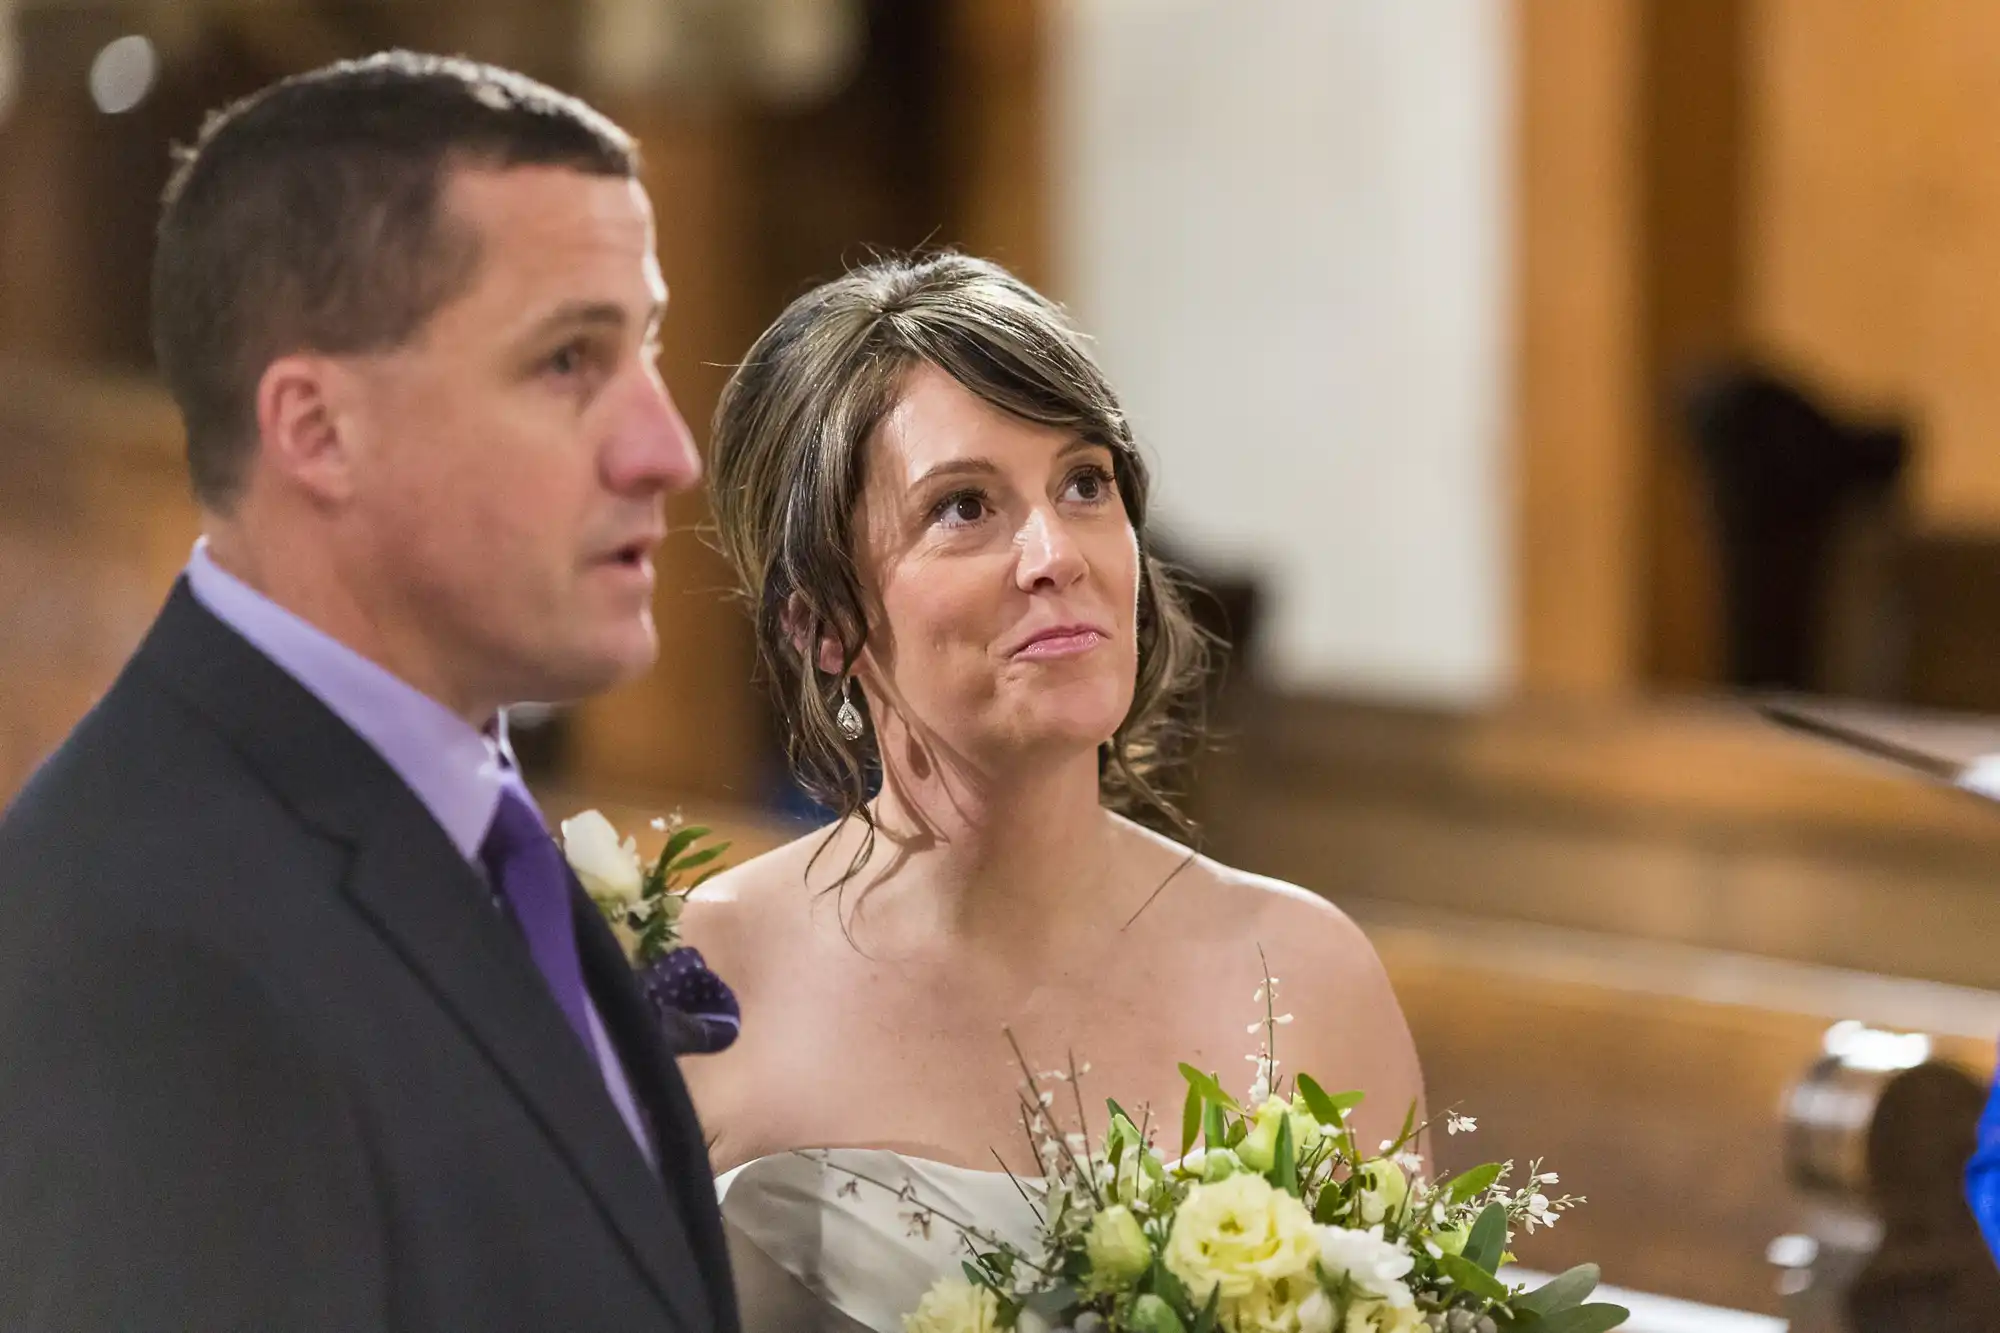 Bride and groom attentively listening during wedding ceremony in a church, bride holding a bouquet of white flowers.